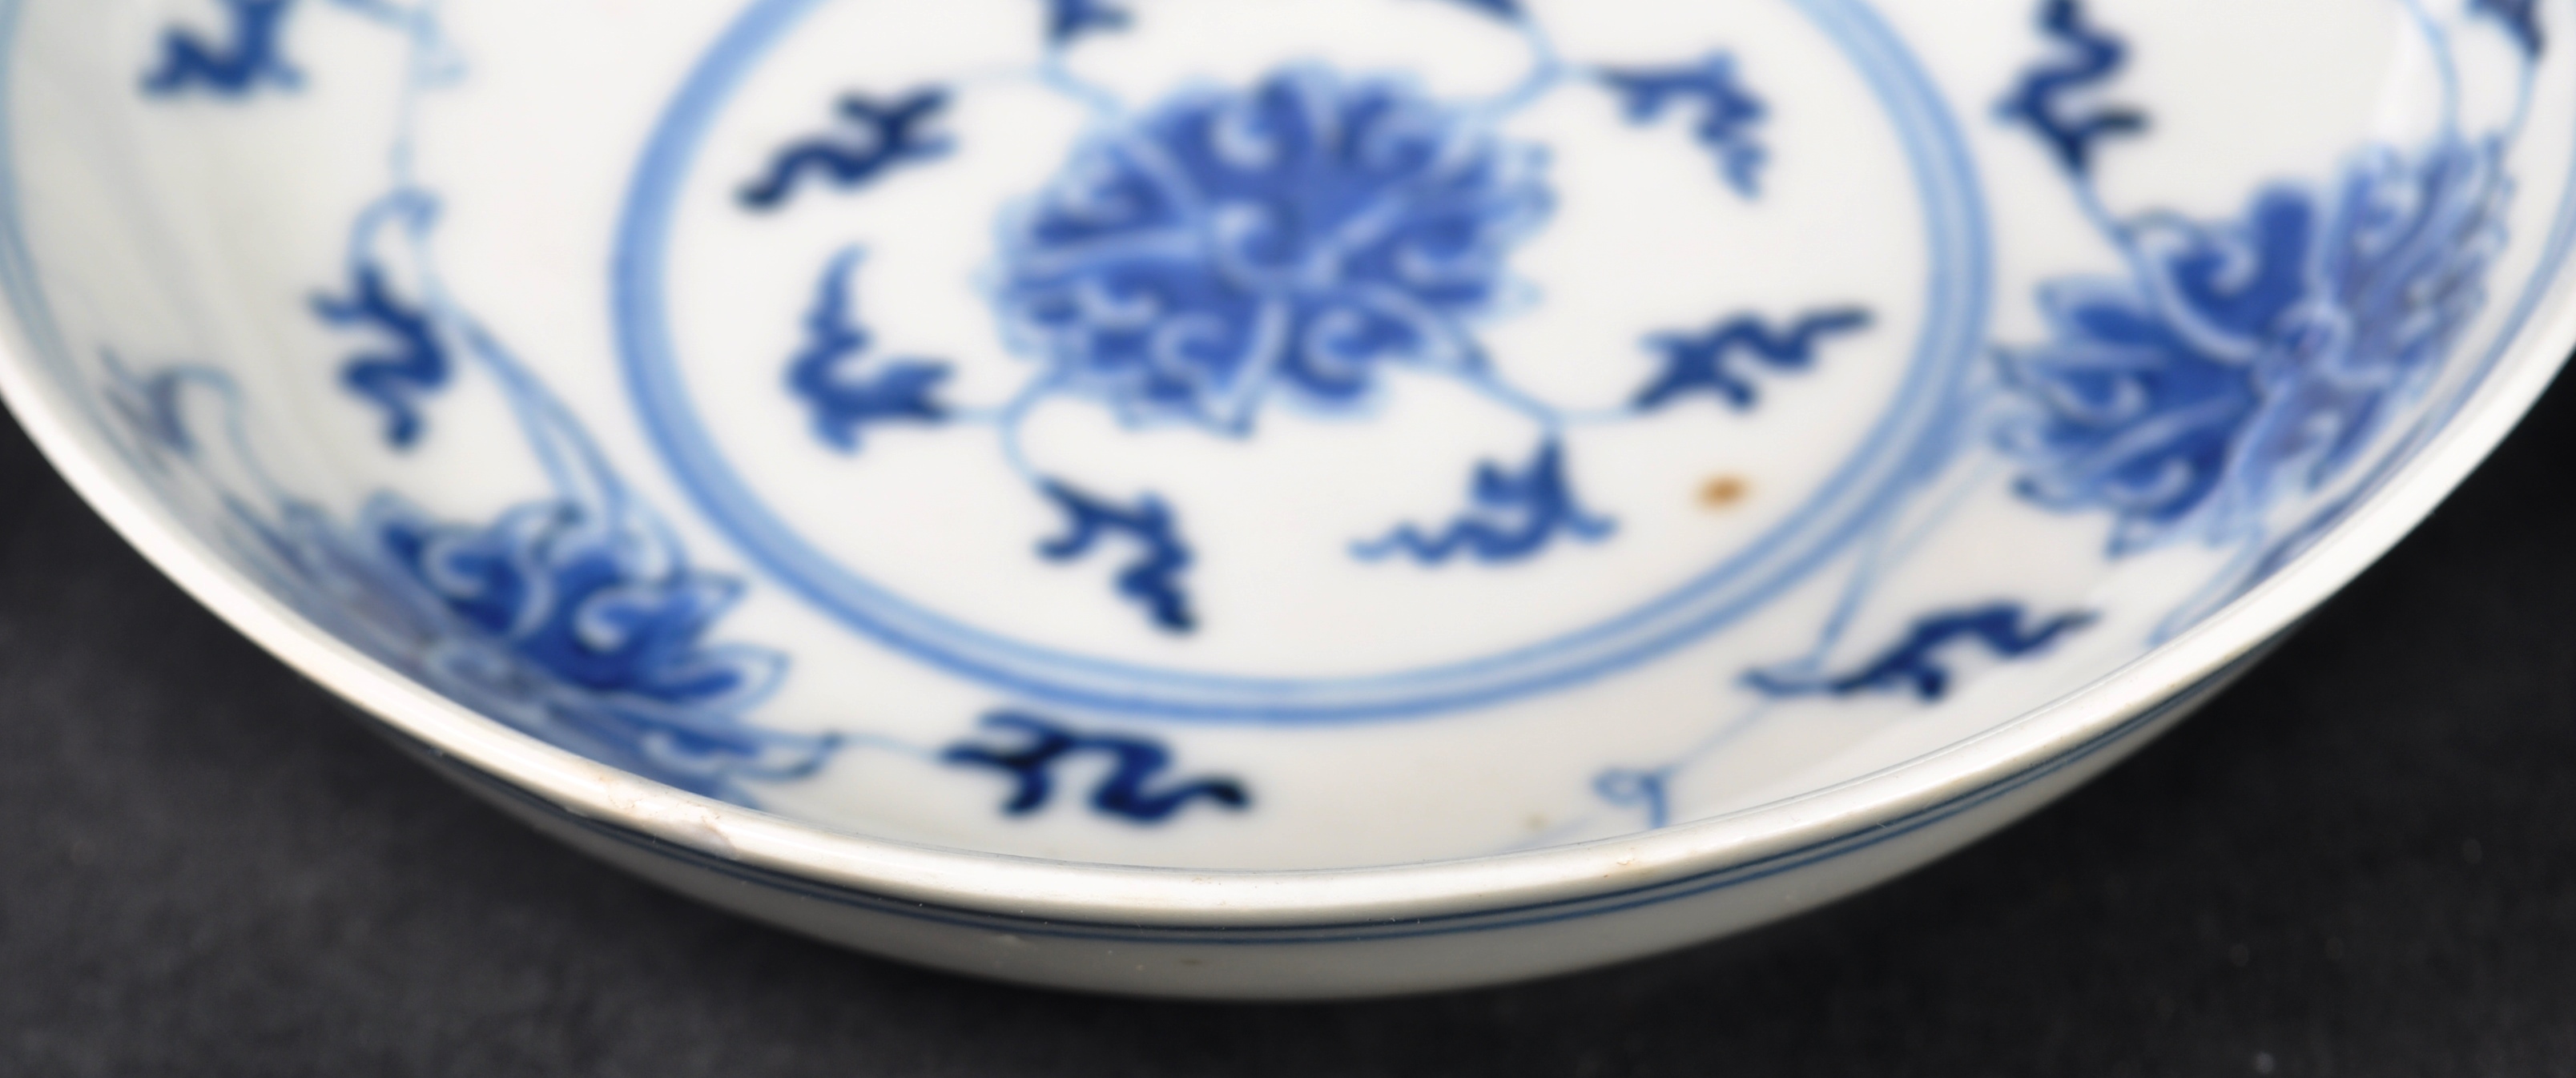 19TH CENTURY CHINESE BLUE & WHITE PORCELAIN PLATE - Image 4 of 6